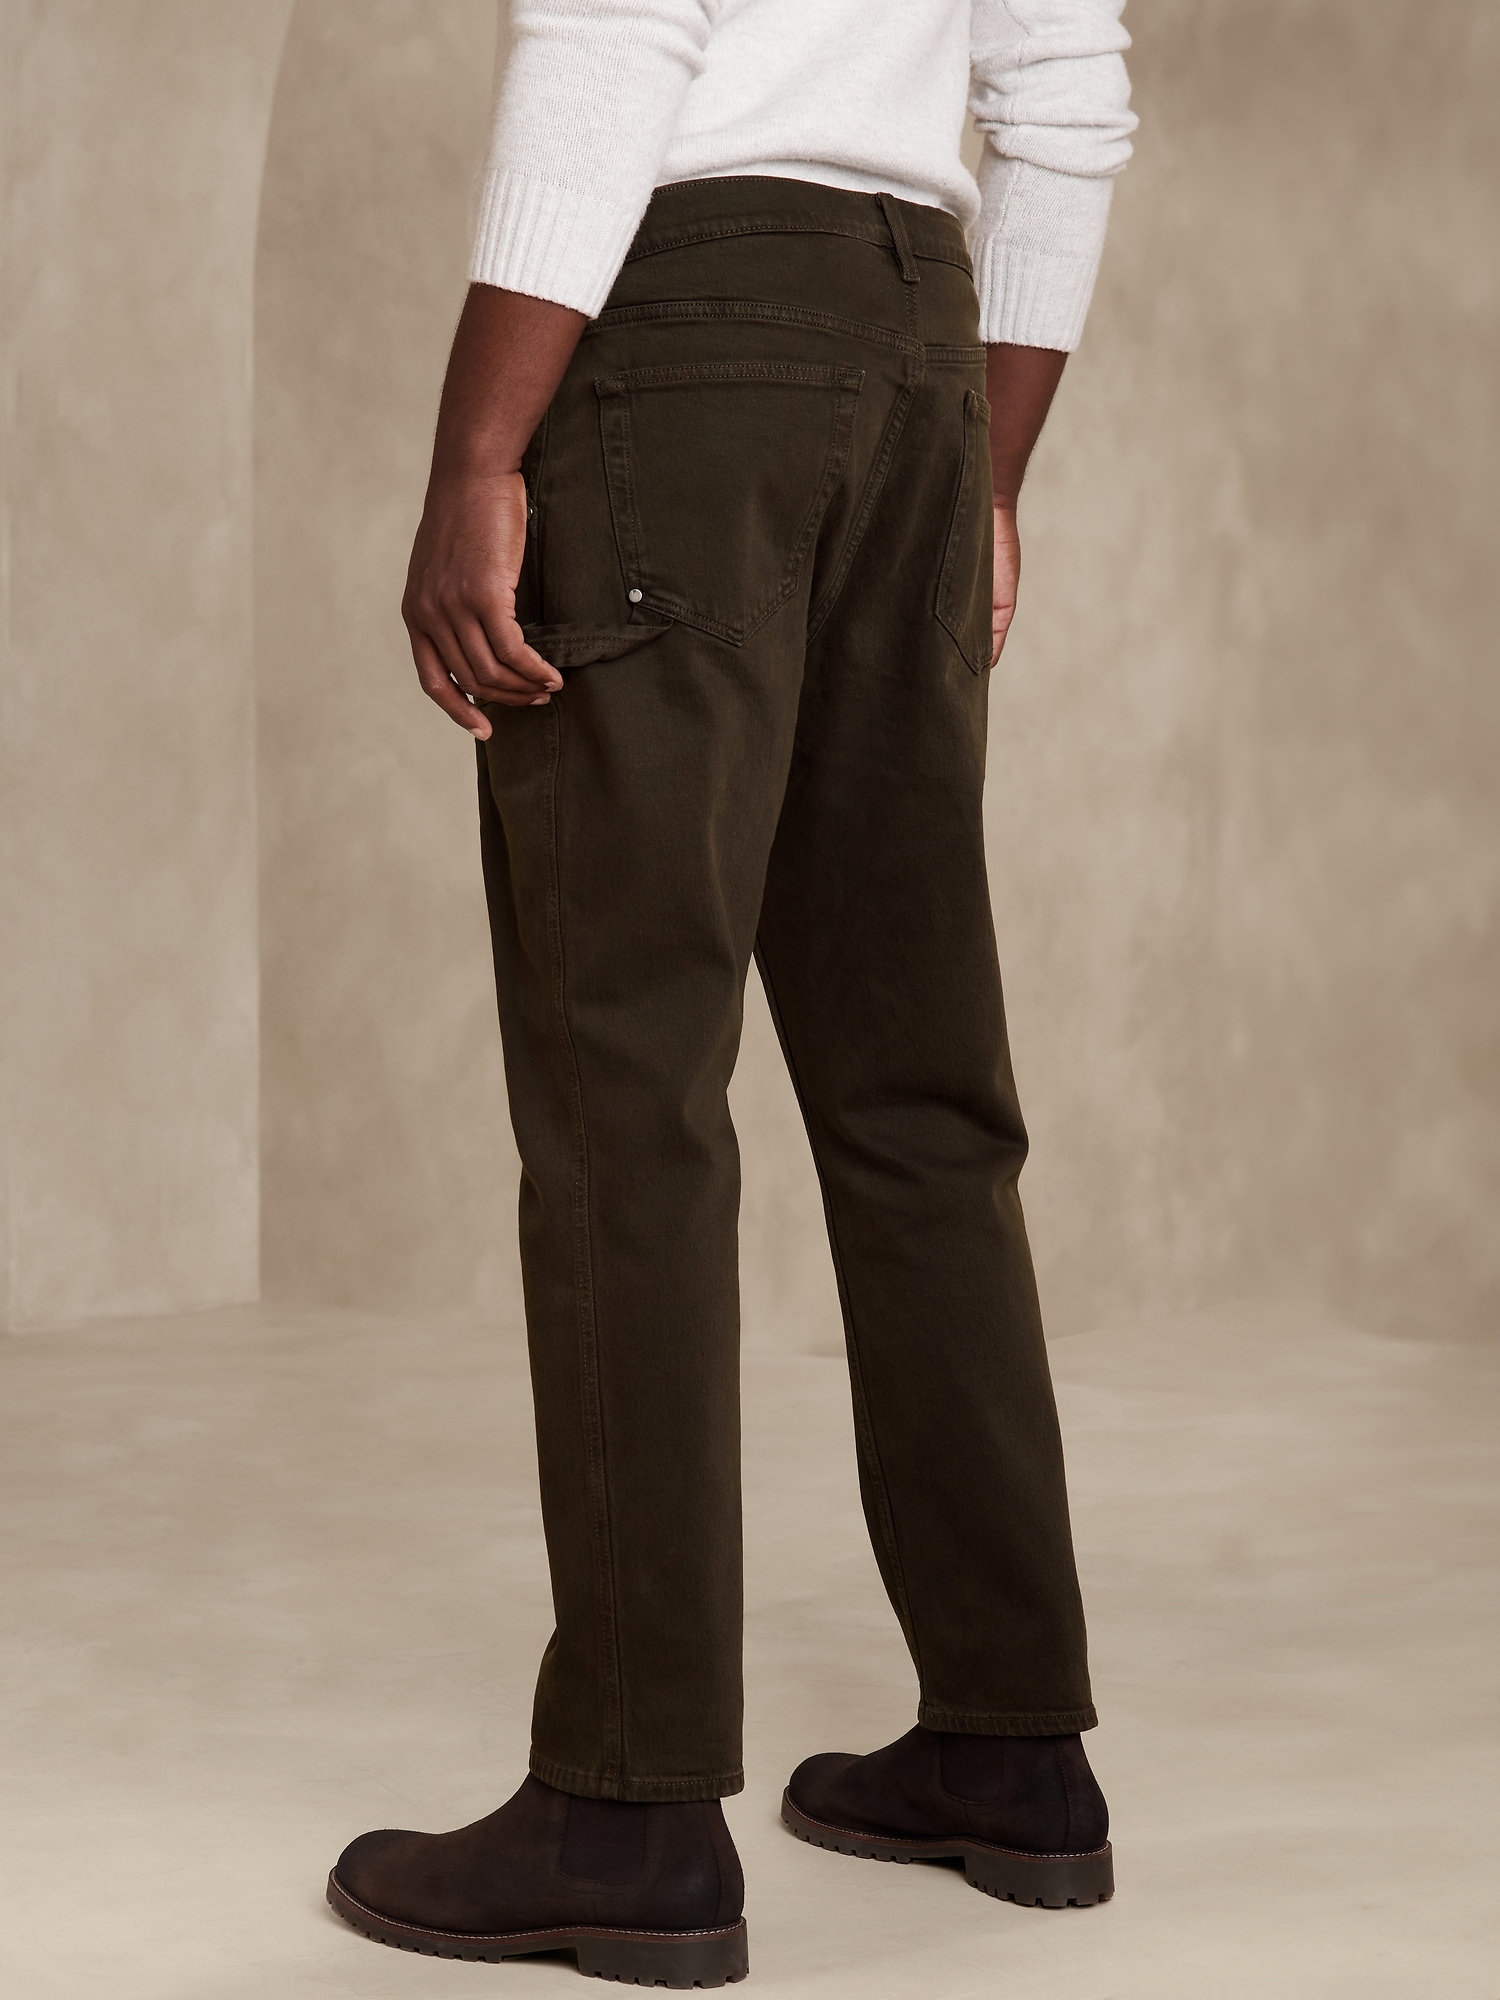 Athletic-Fit Utility Pant